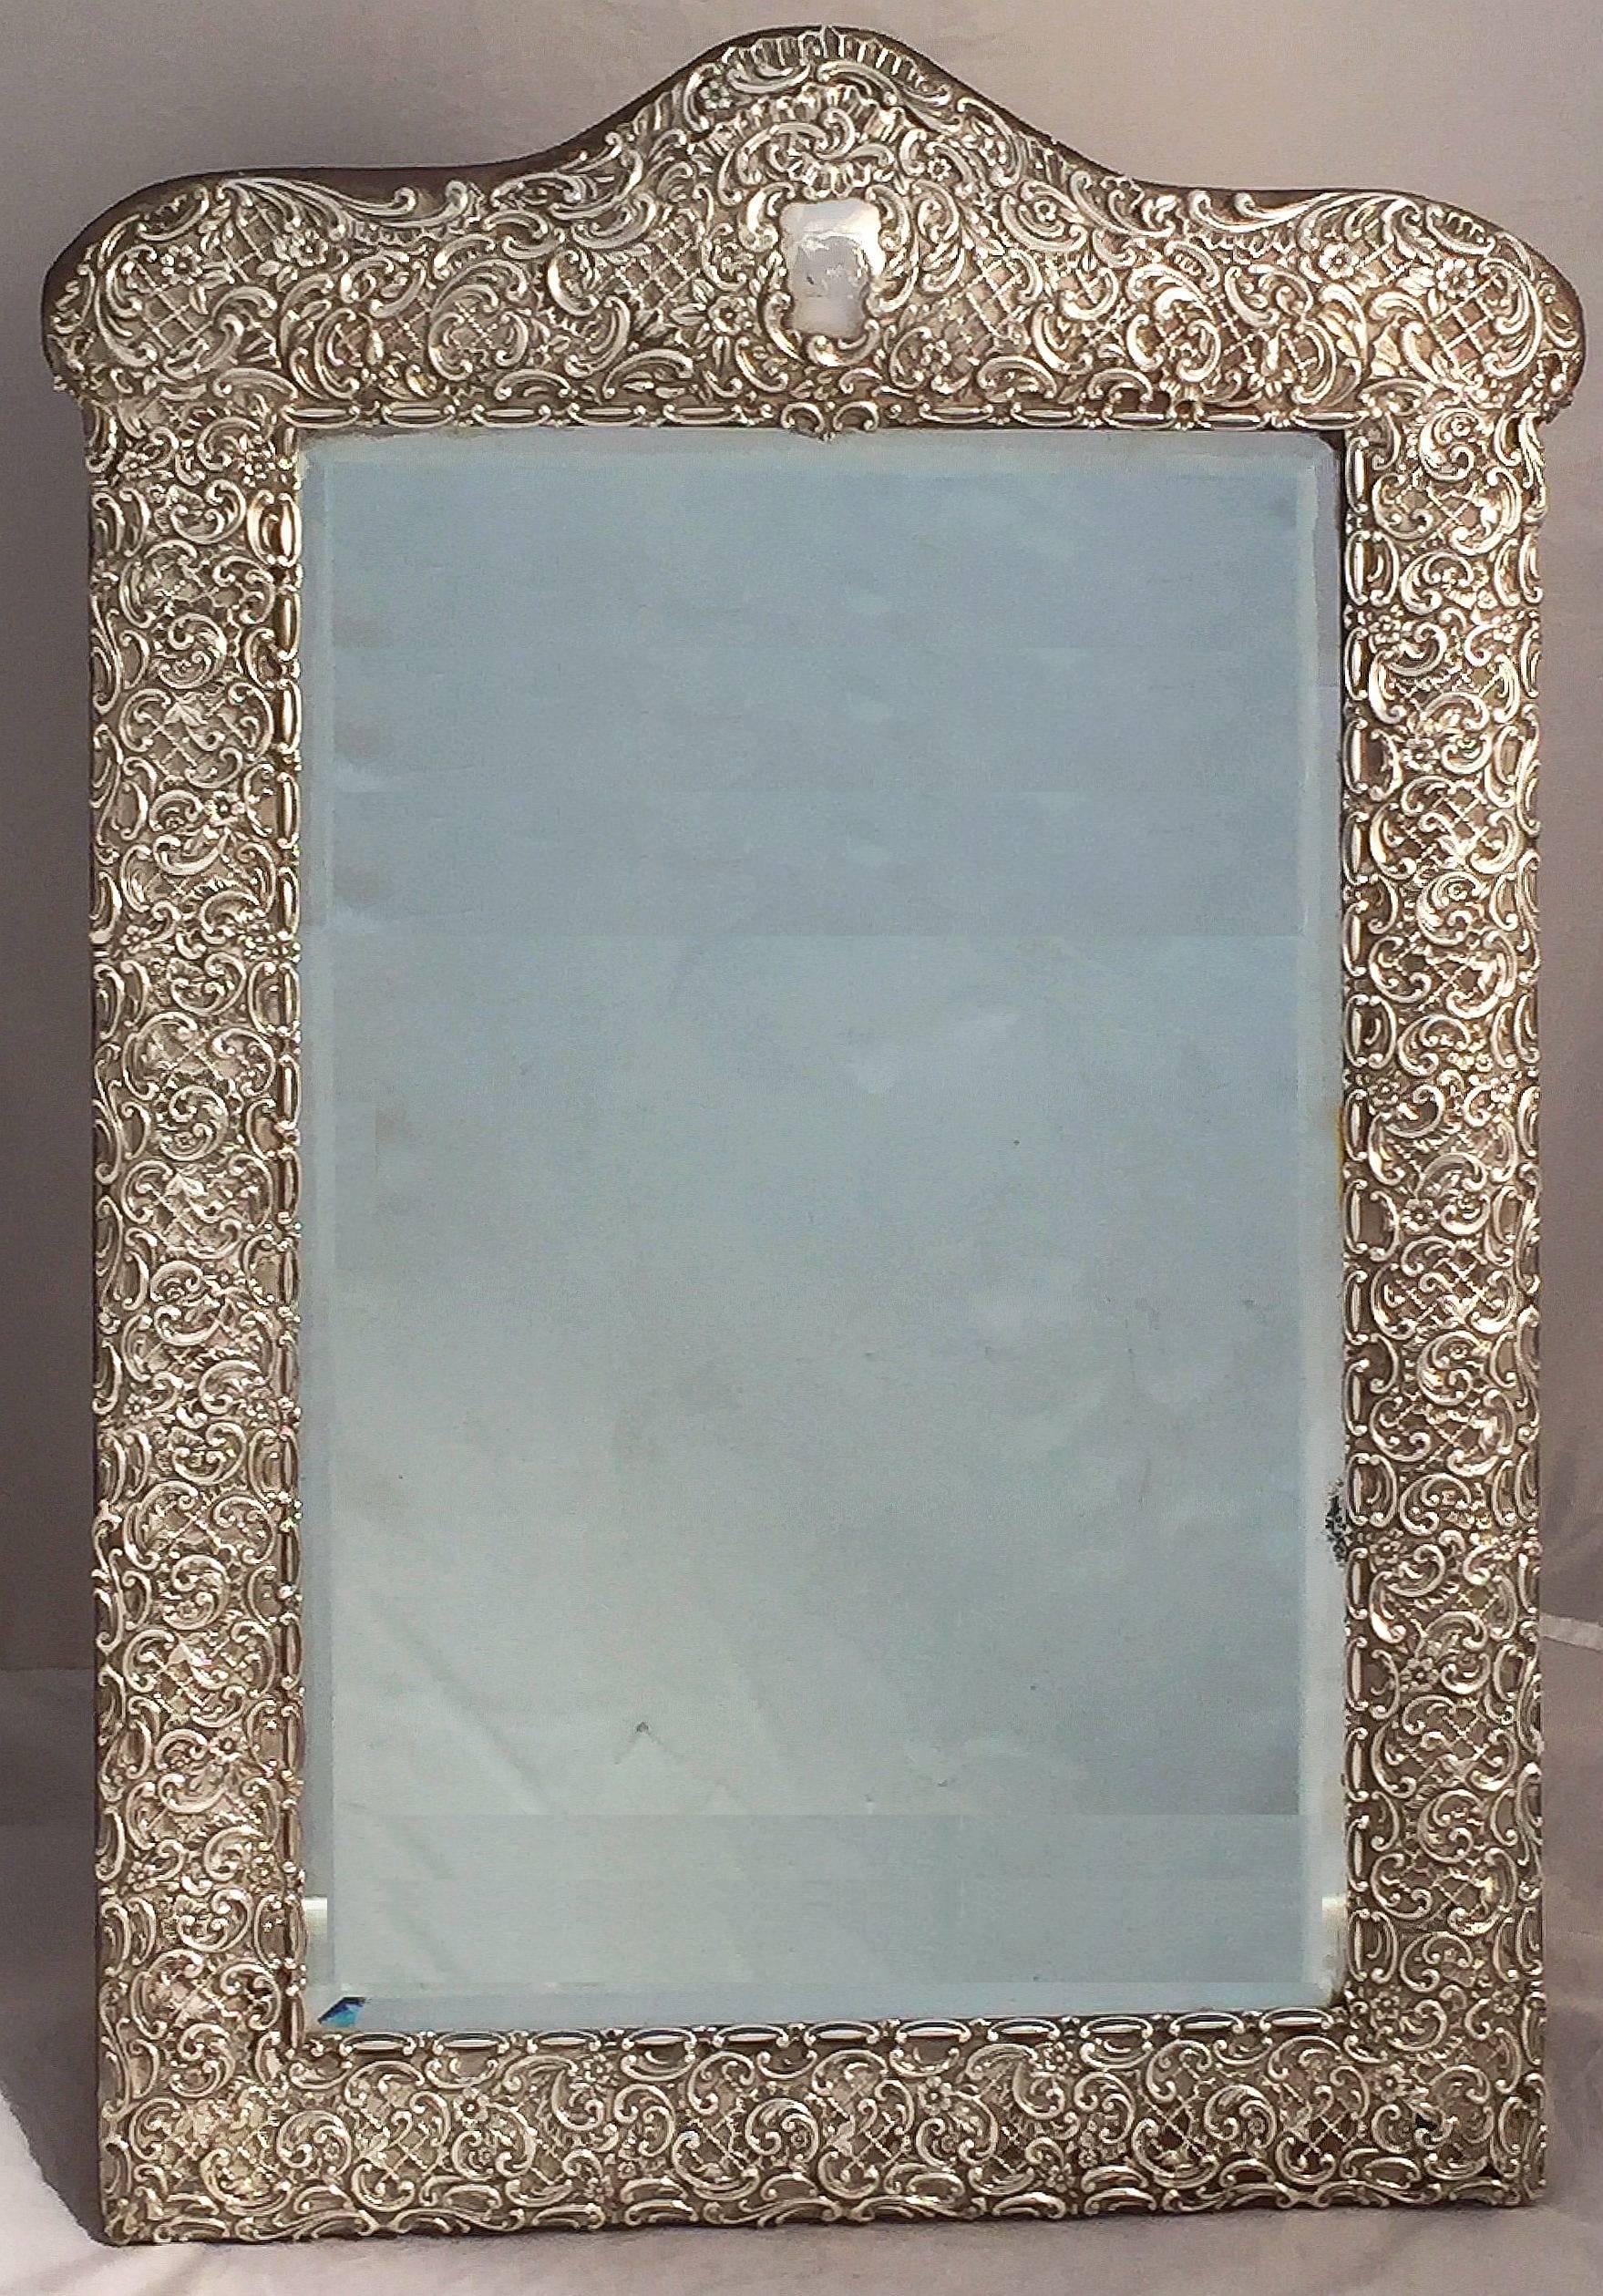 Beveled English Vanity or Table Mirror of Sterling Silver, circa 1898